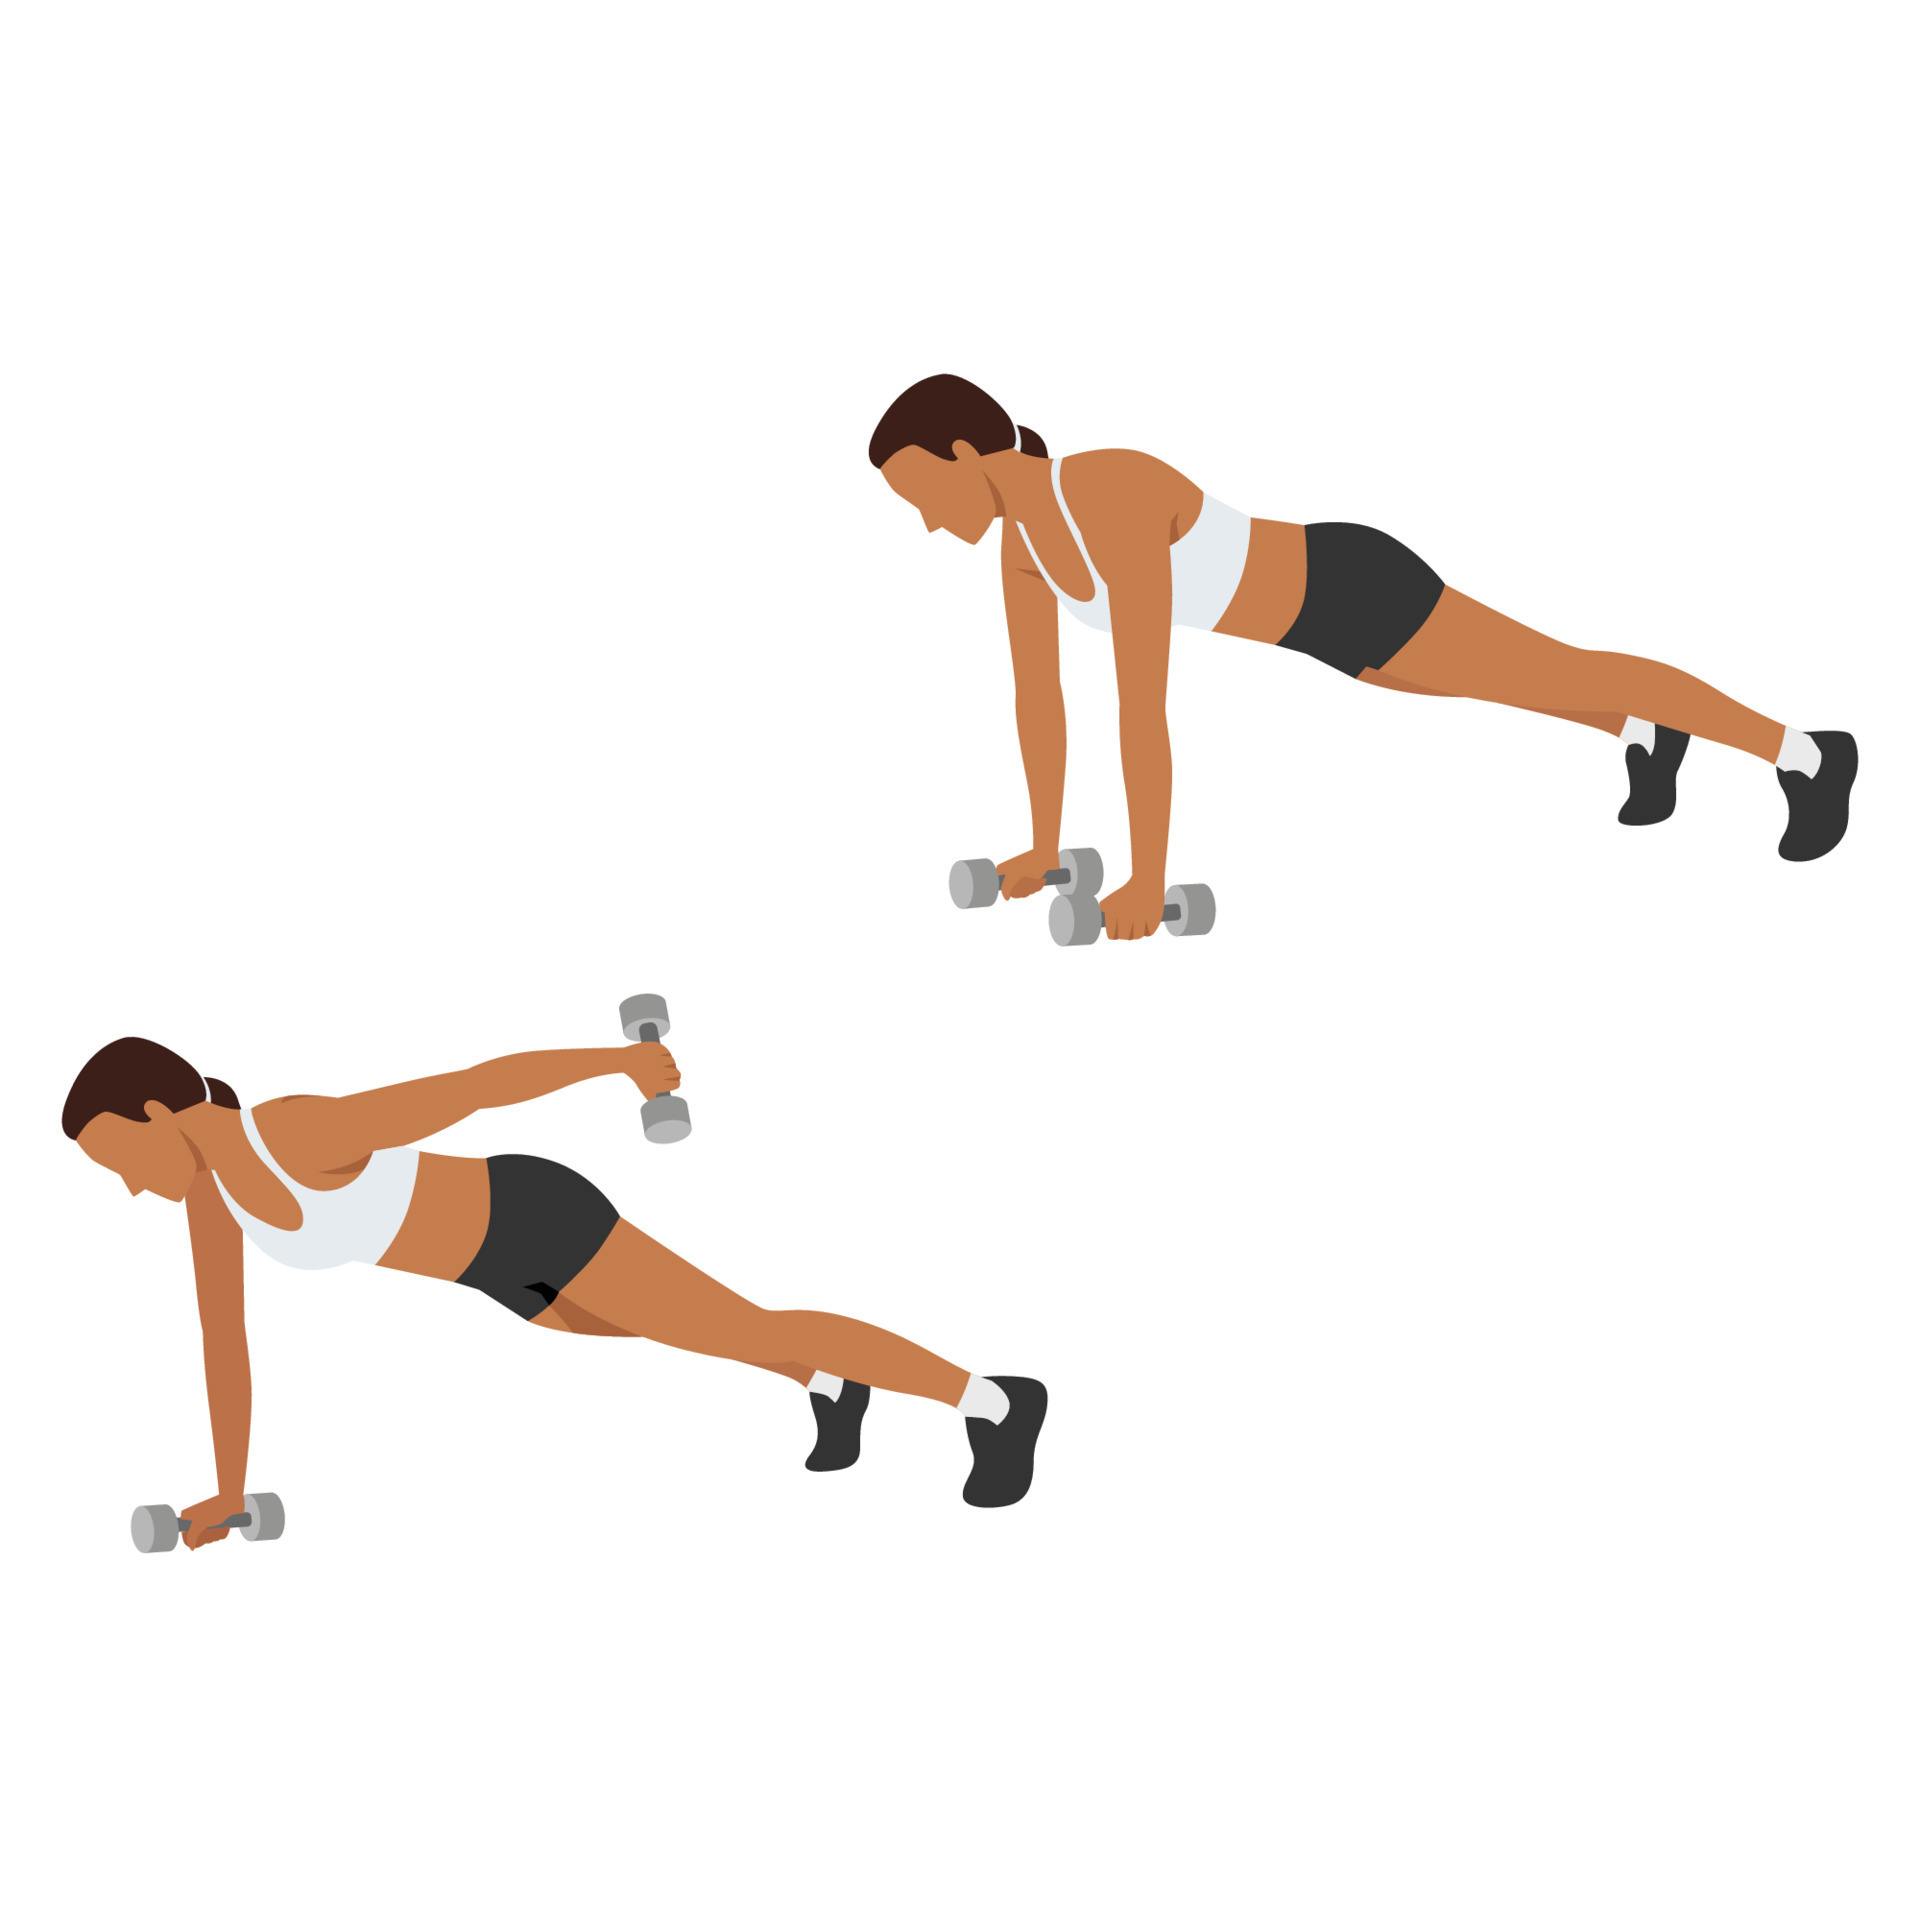 Woman doing Chest press punch up exercise. Flat vector illustration  isolated on white background